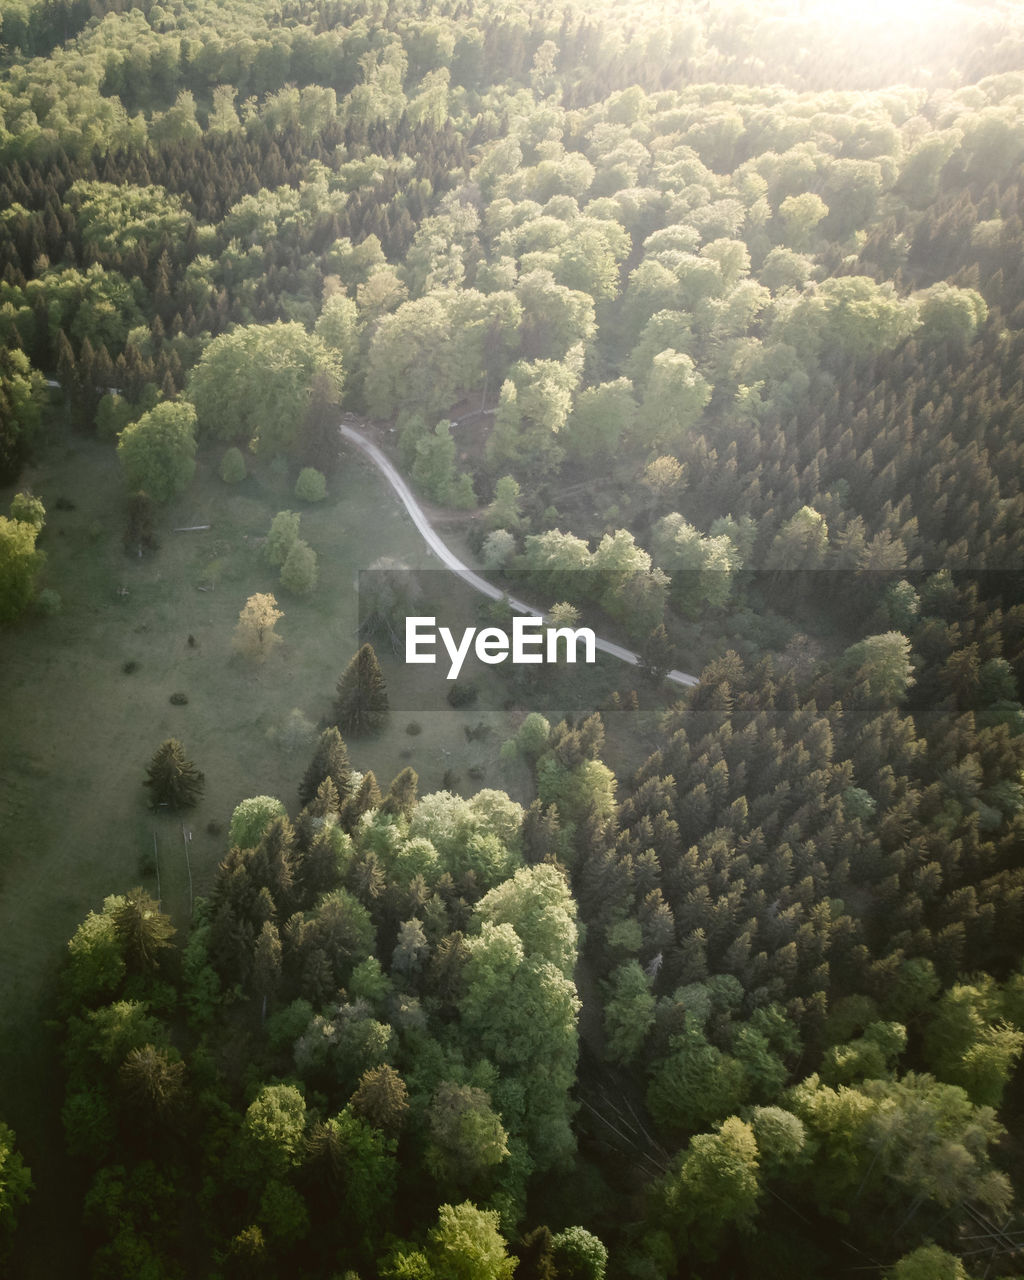 High angle aerial view of trees and clearing in forest during evening light